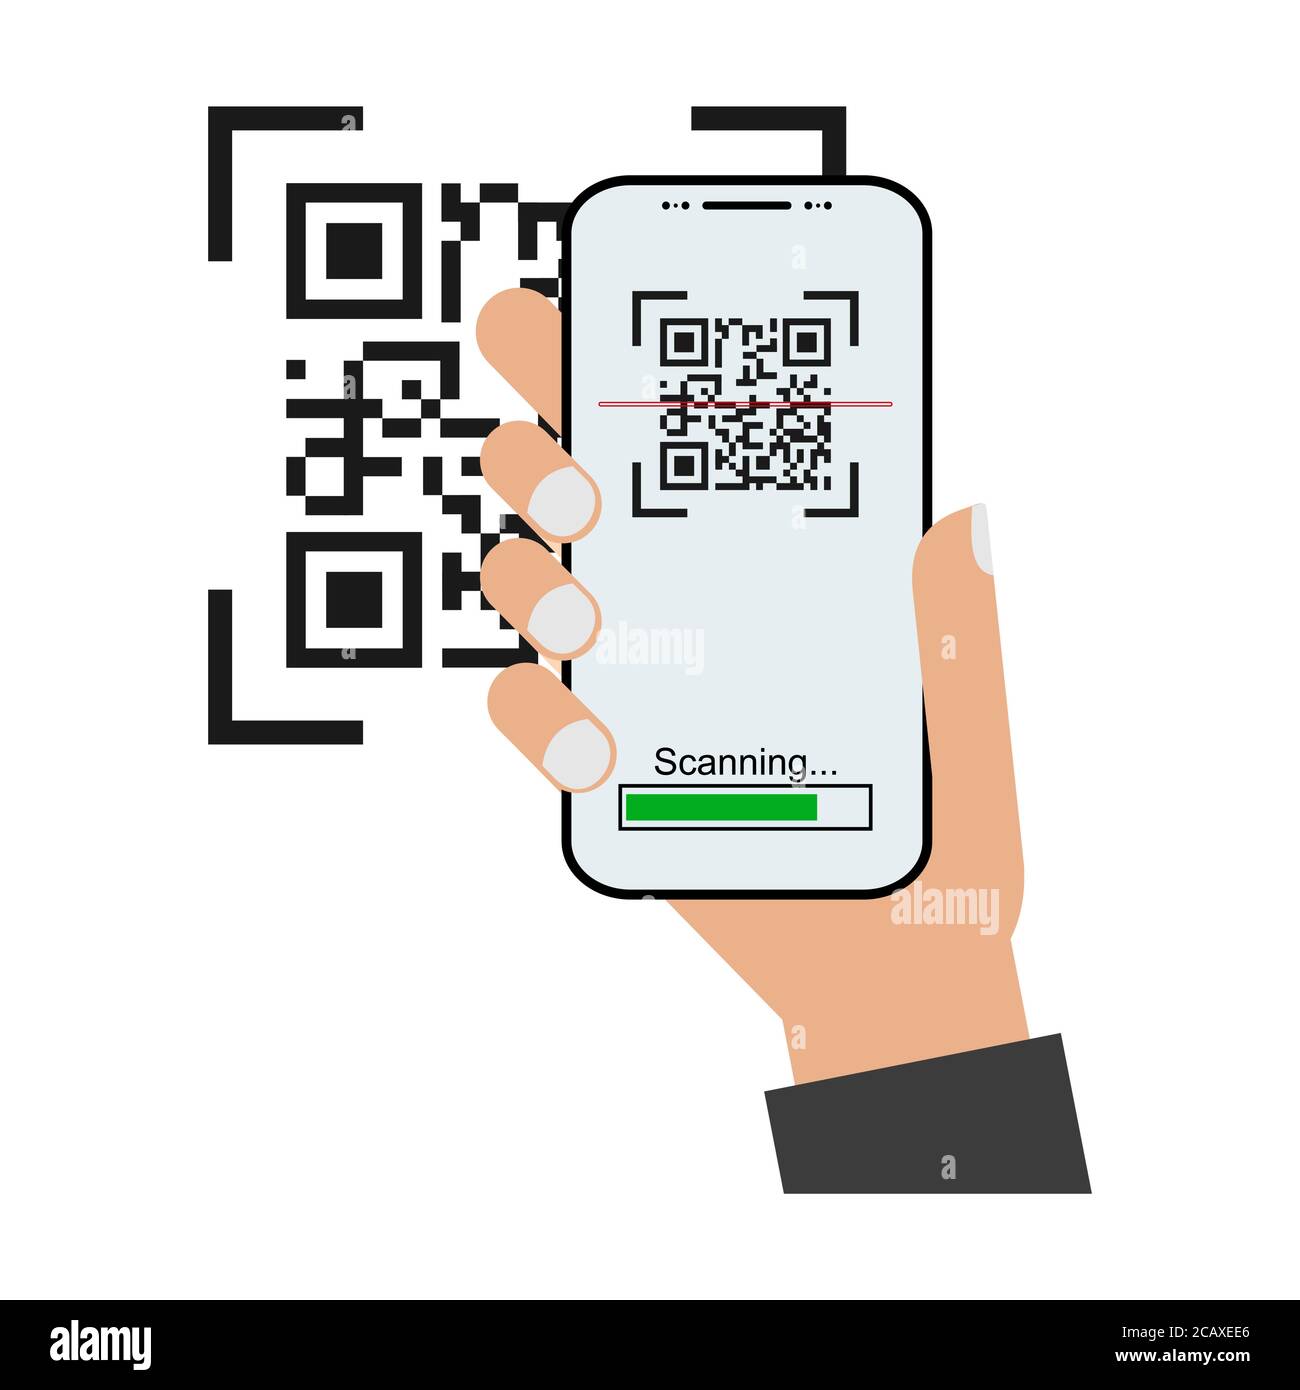 Qr code reader from image